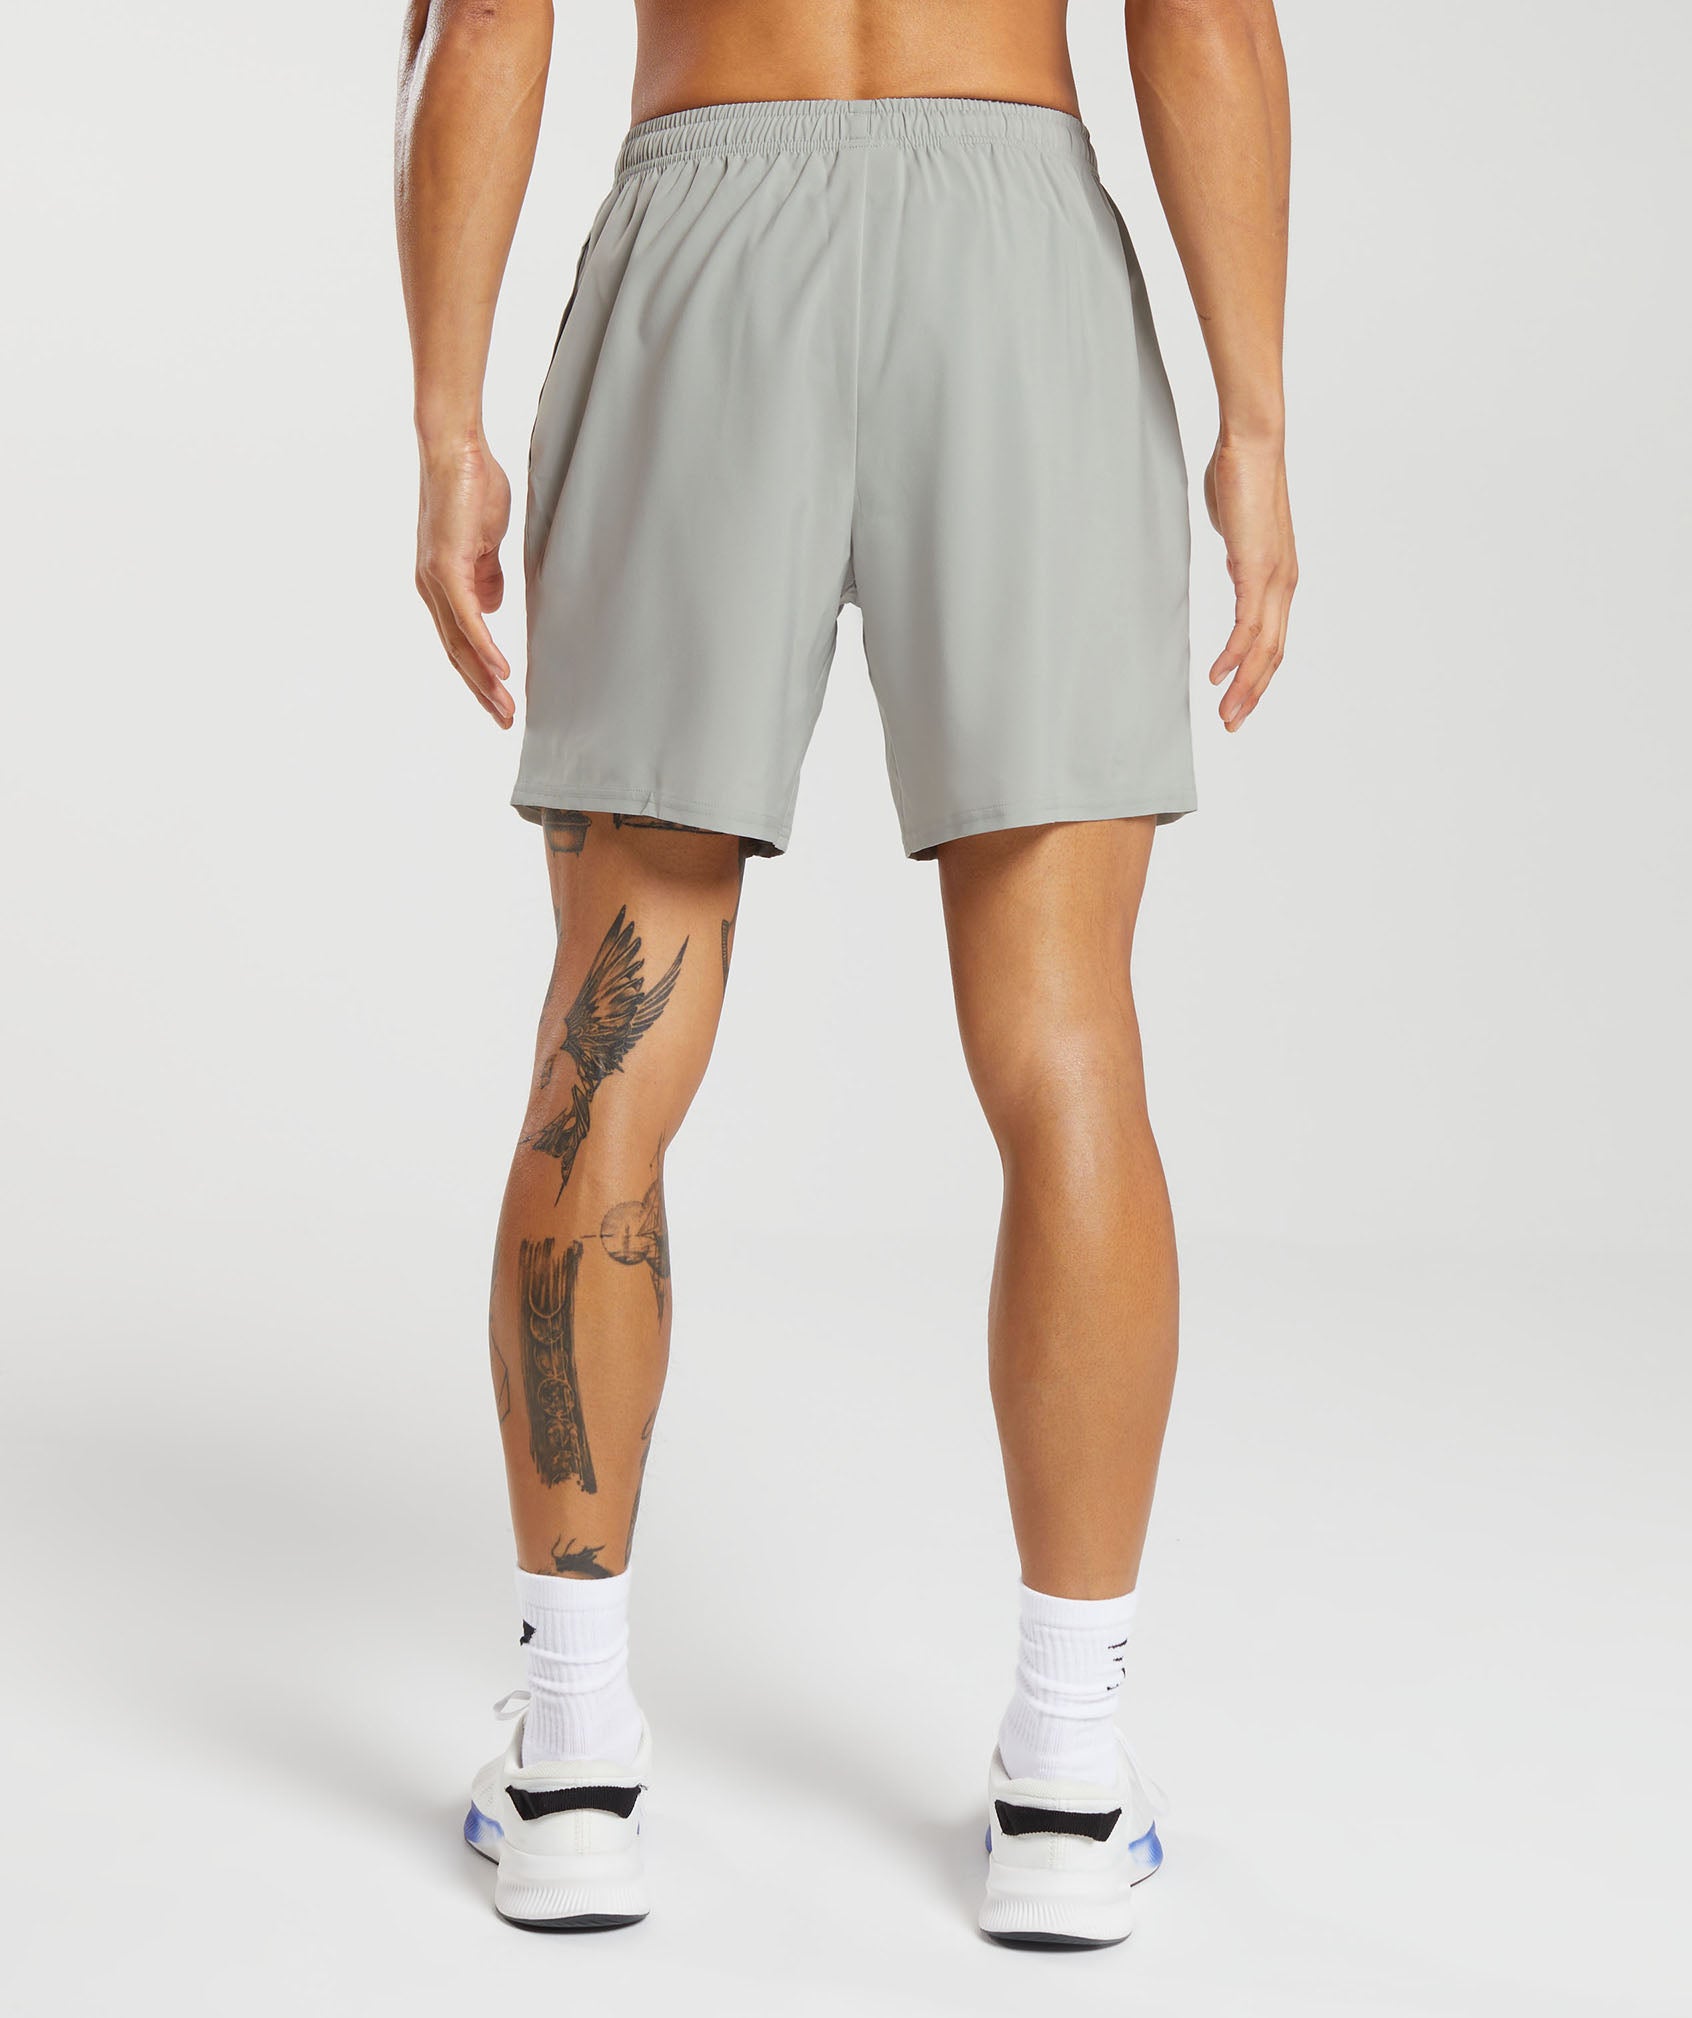 Arrival 7" Shorts in Stone Grey - view 2